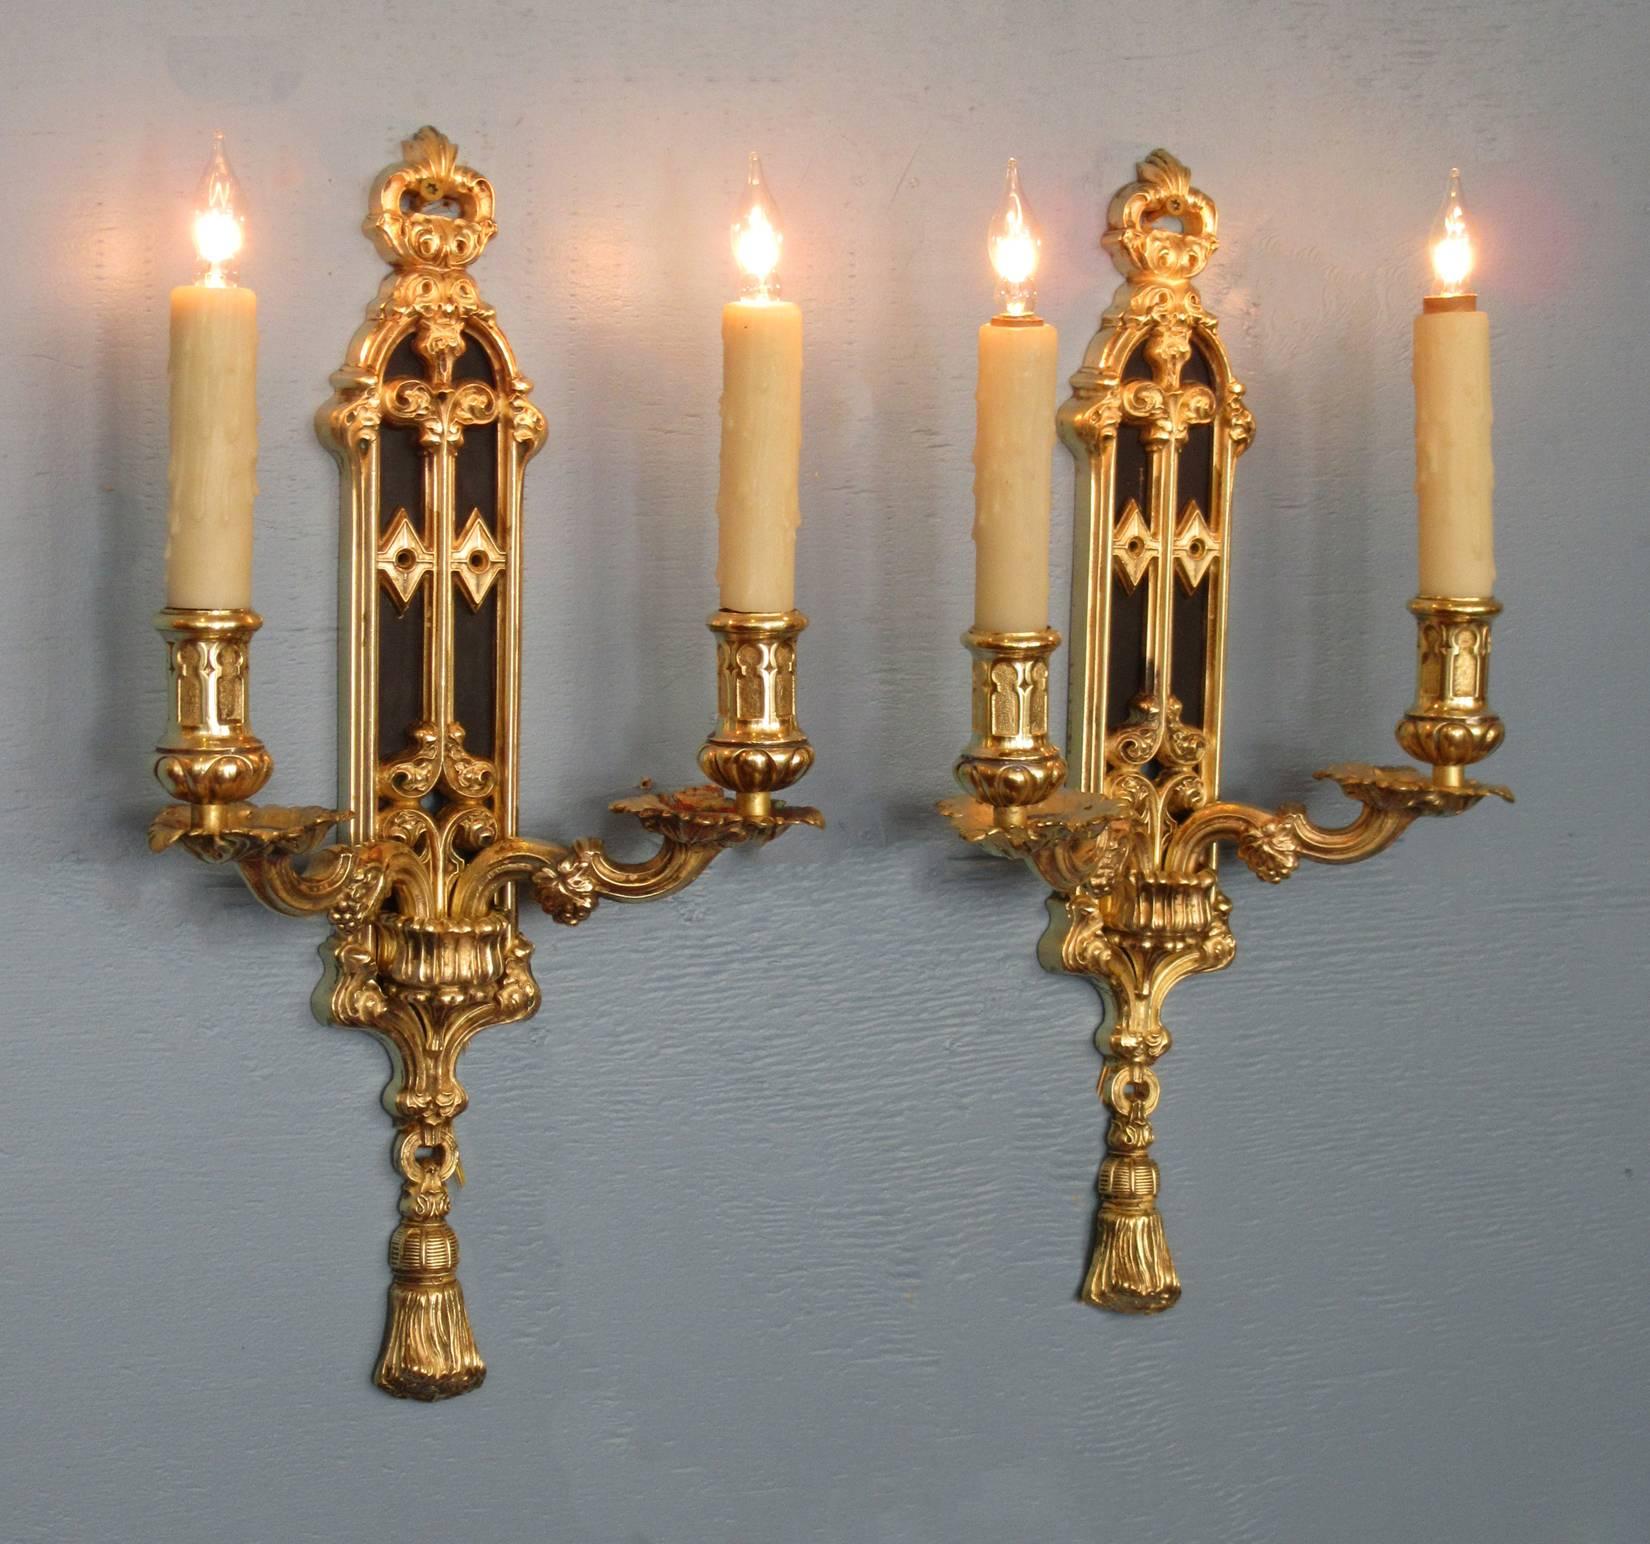 Pair of Mid 19th C English Gothic Bronze Doré and Patinated Sconces 3